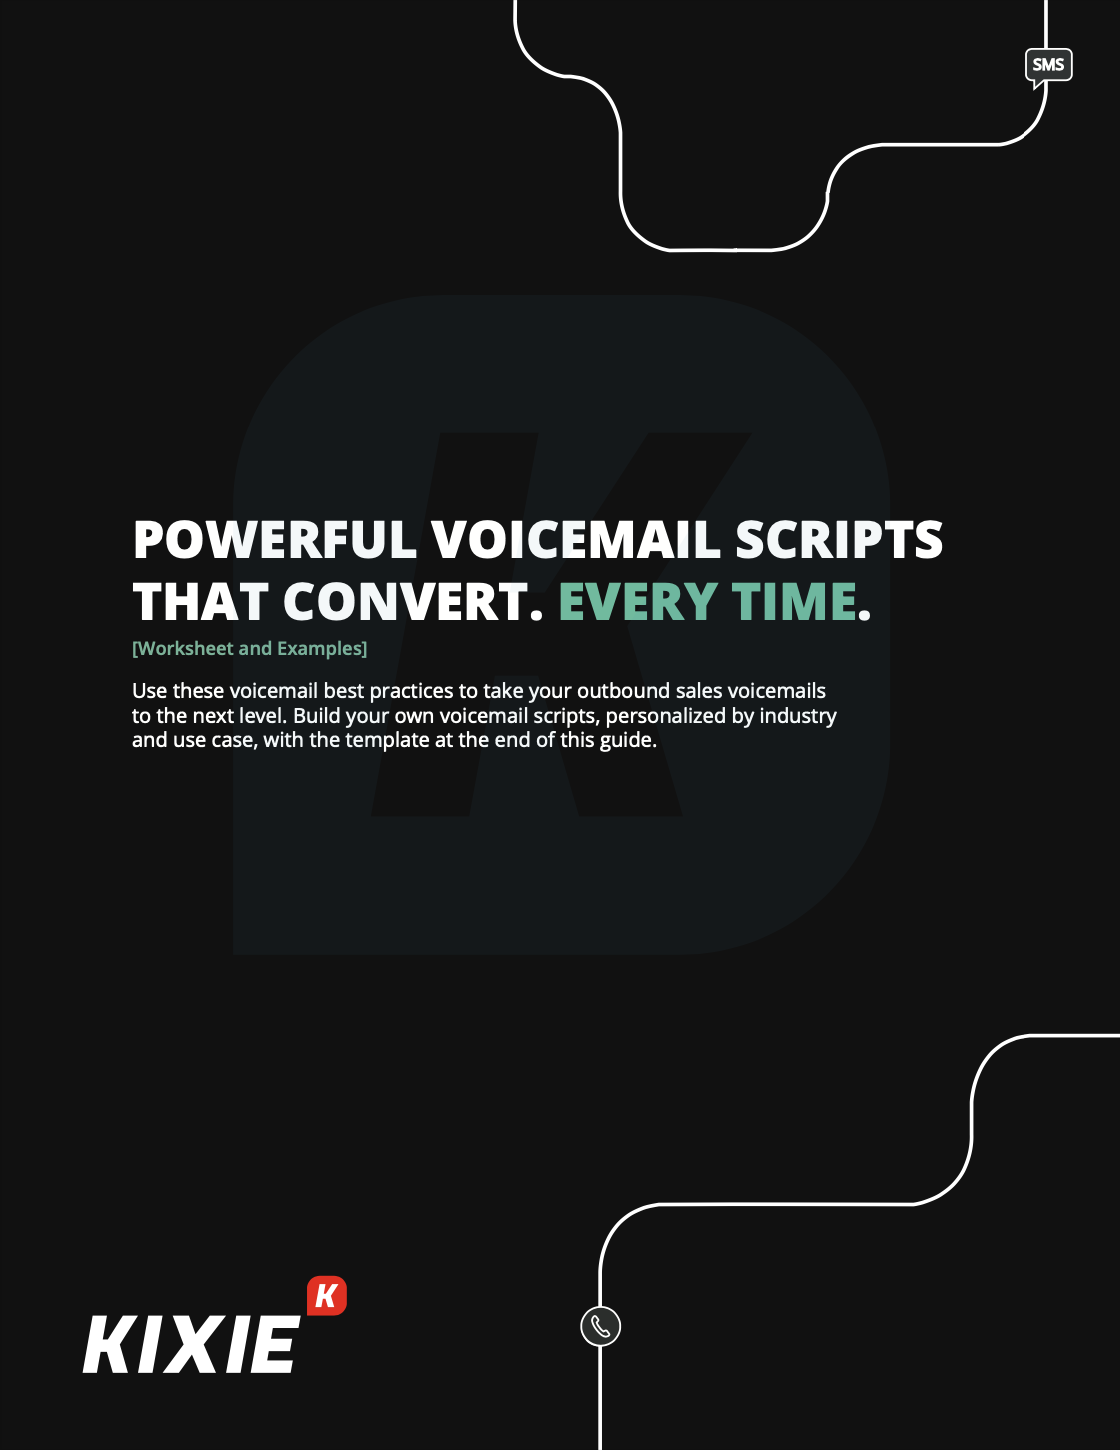 Powerful Voicemail Scripts and Best Practices for Outbound Sales Calls